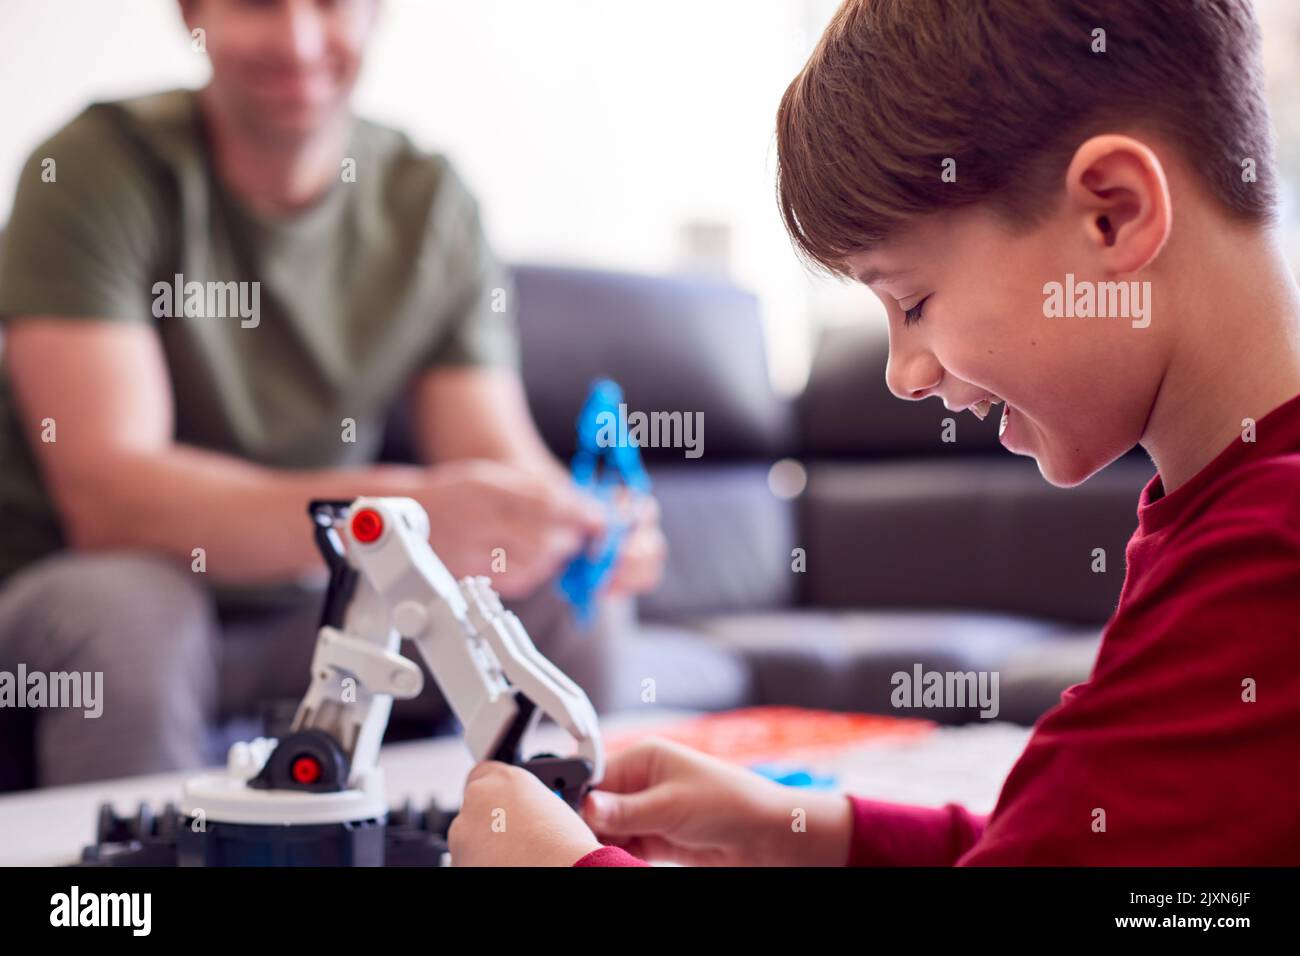 Father And Son Wearing Pyjamas Building Robotic Arm From Plastic Kit At Home Stock Photo